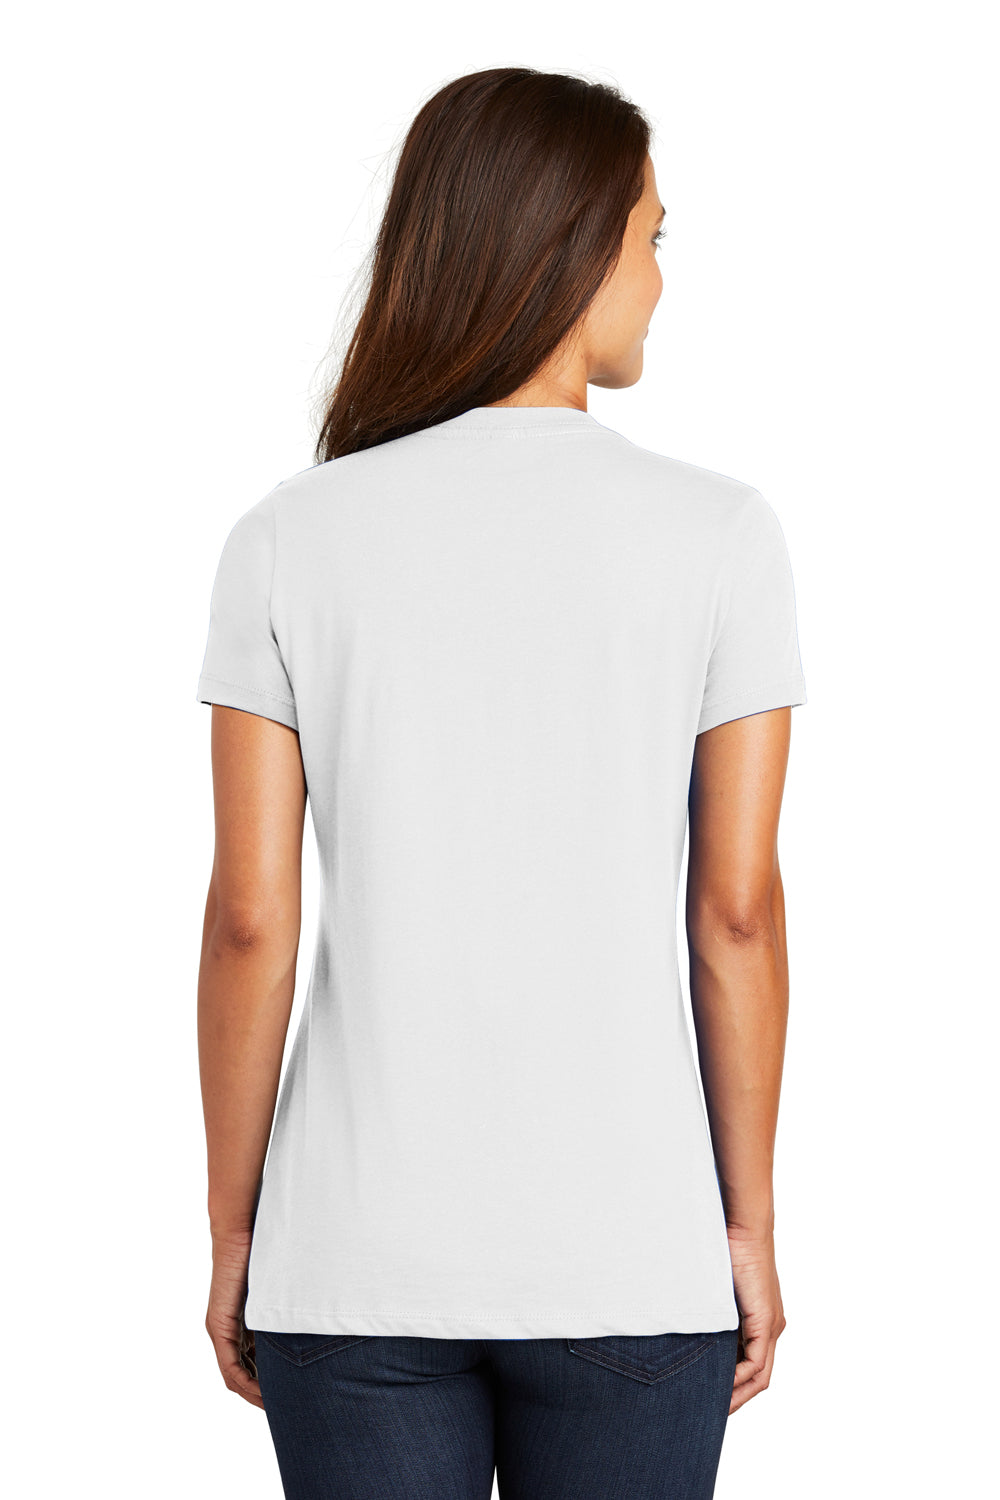 District DM1170L Womens Perfect Weight Short Sleeve V-Neck T-Shirt White Back